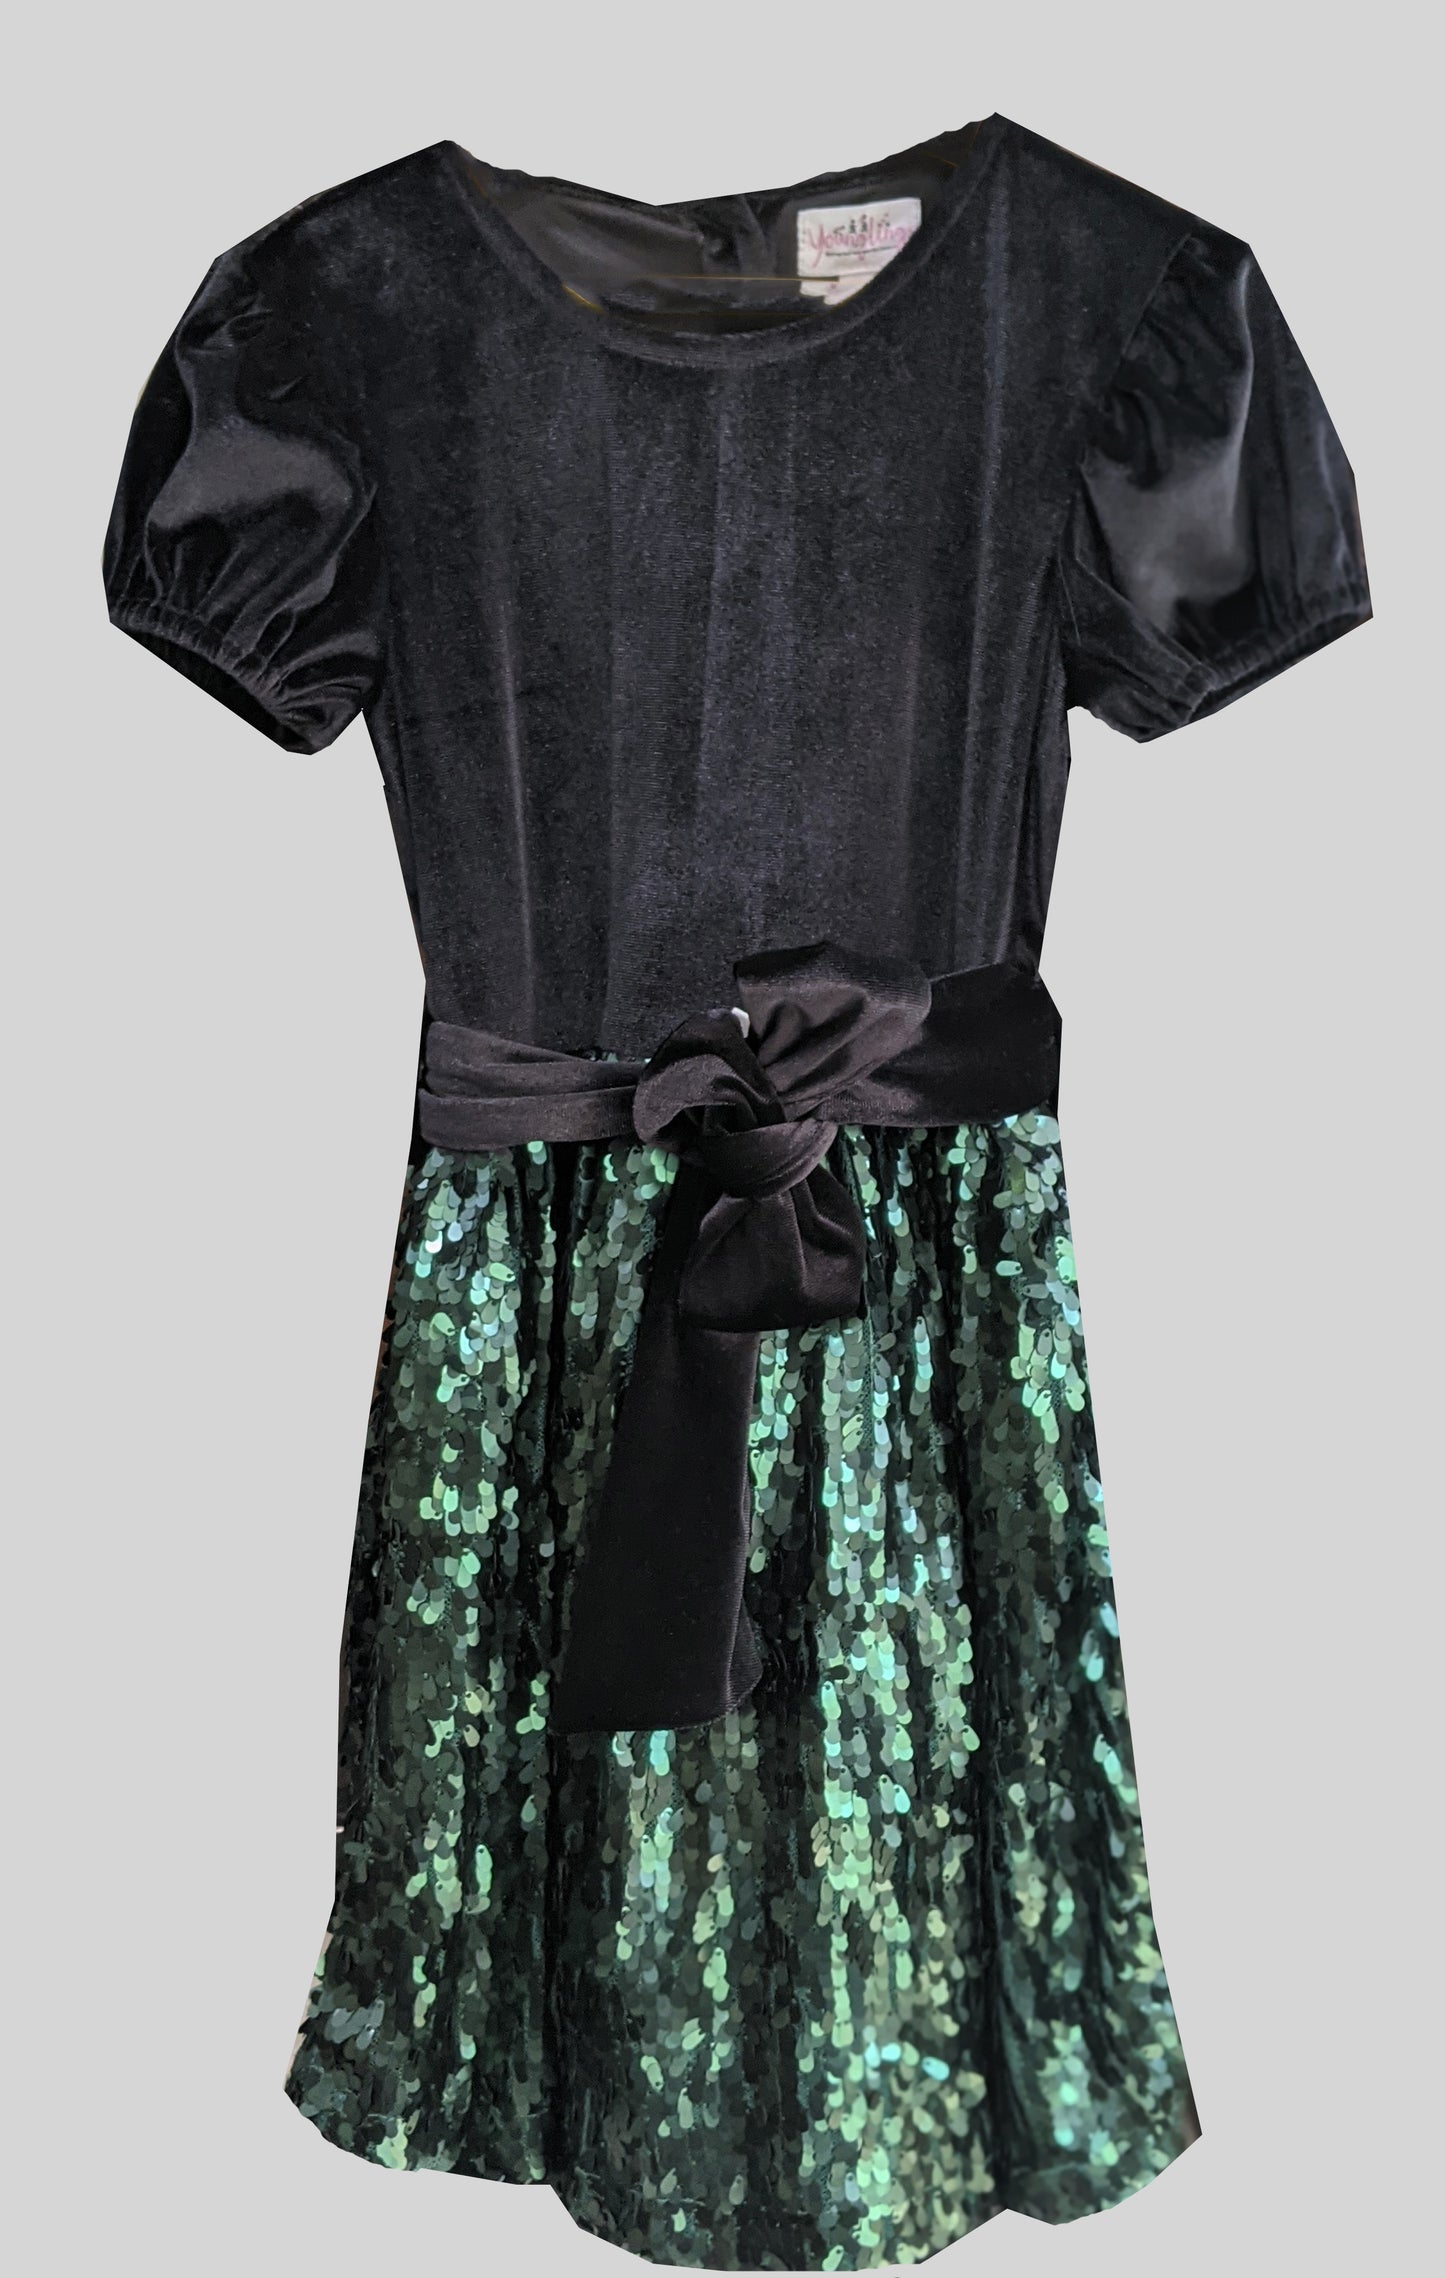 BLACK VELVET DRESS WITH GREEN SEQUINS ON THE FRONT,ZIP AT THE BACK AND SHORT PUFF SLEEVES AND DETACHABLE TIE BELT AT THE WAIST